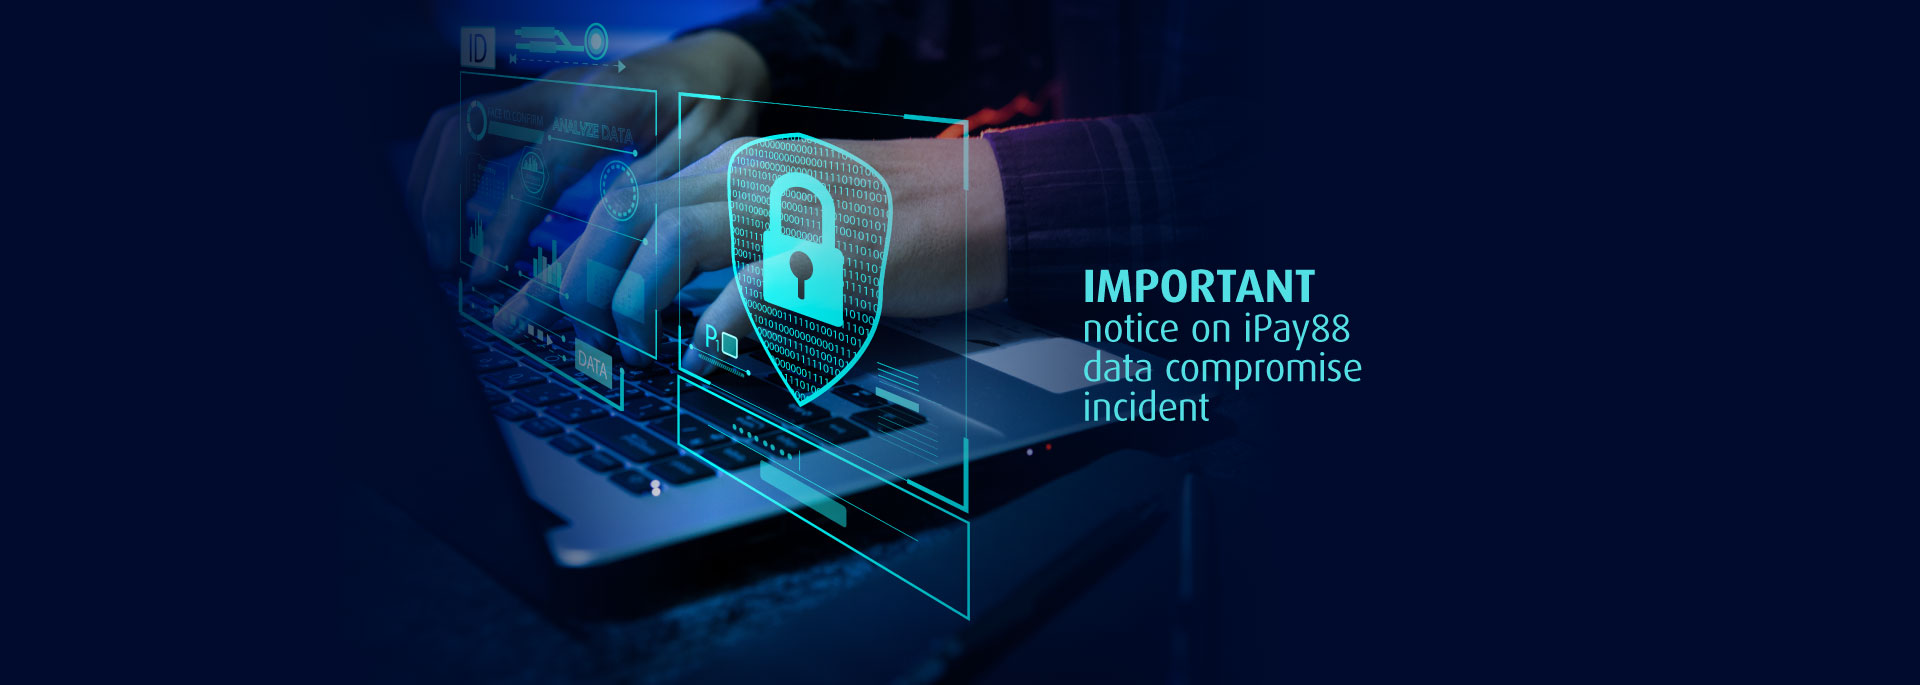 Important notice on iPay88 data compromise incident